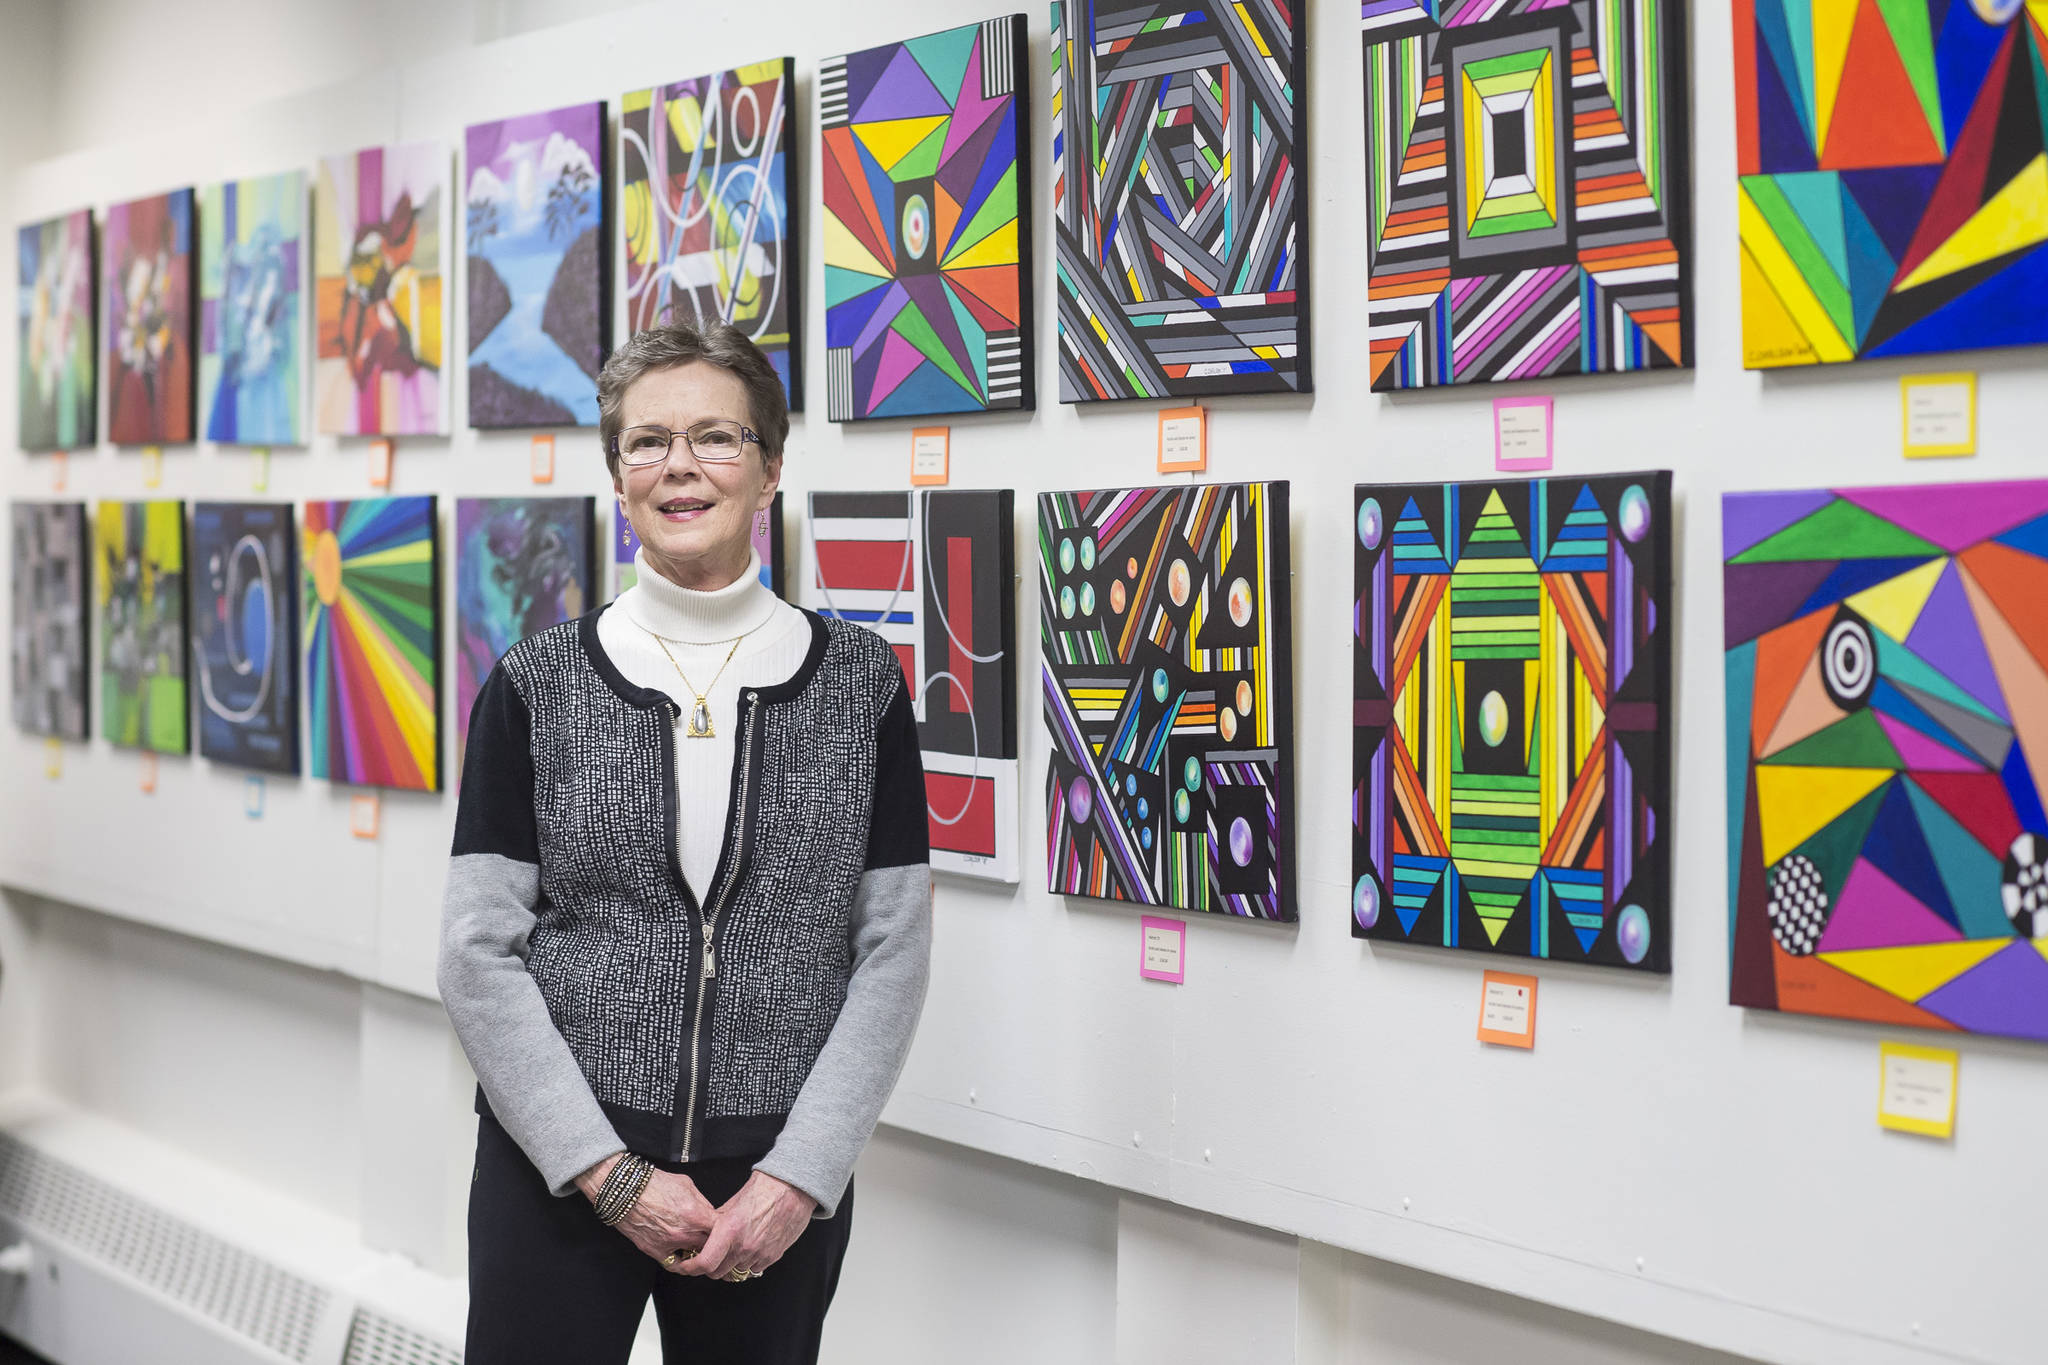 Carol Carlson stands with her paintings on display at the Juneau Arts & Humanities Council during First Friday on Friday, Jan. 4, 2019. (Michael Penn | Juneau Empire)